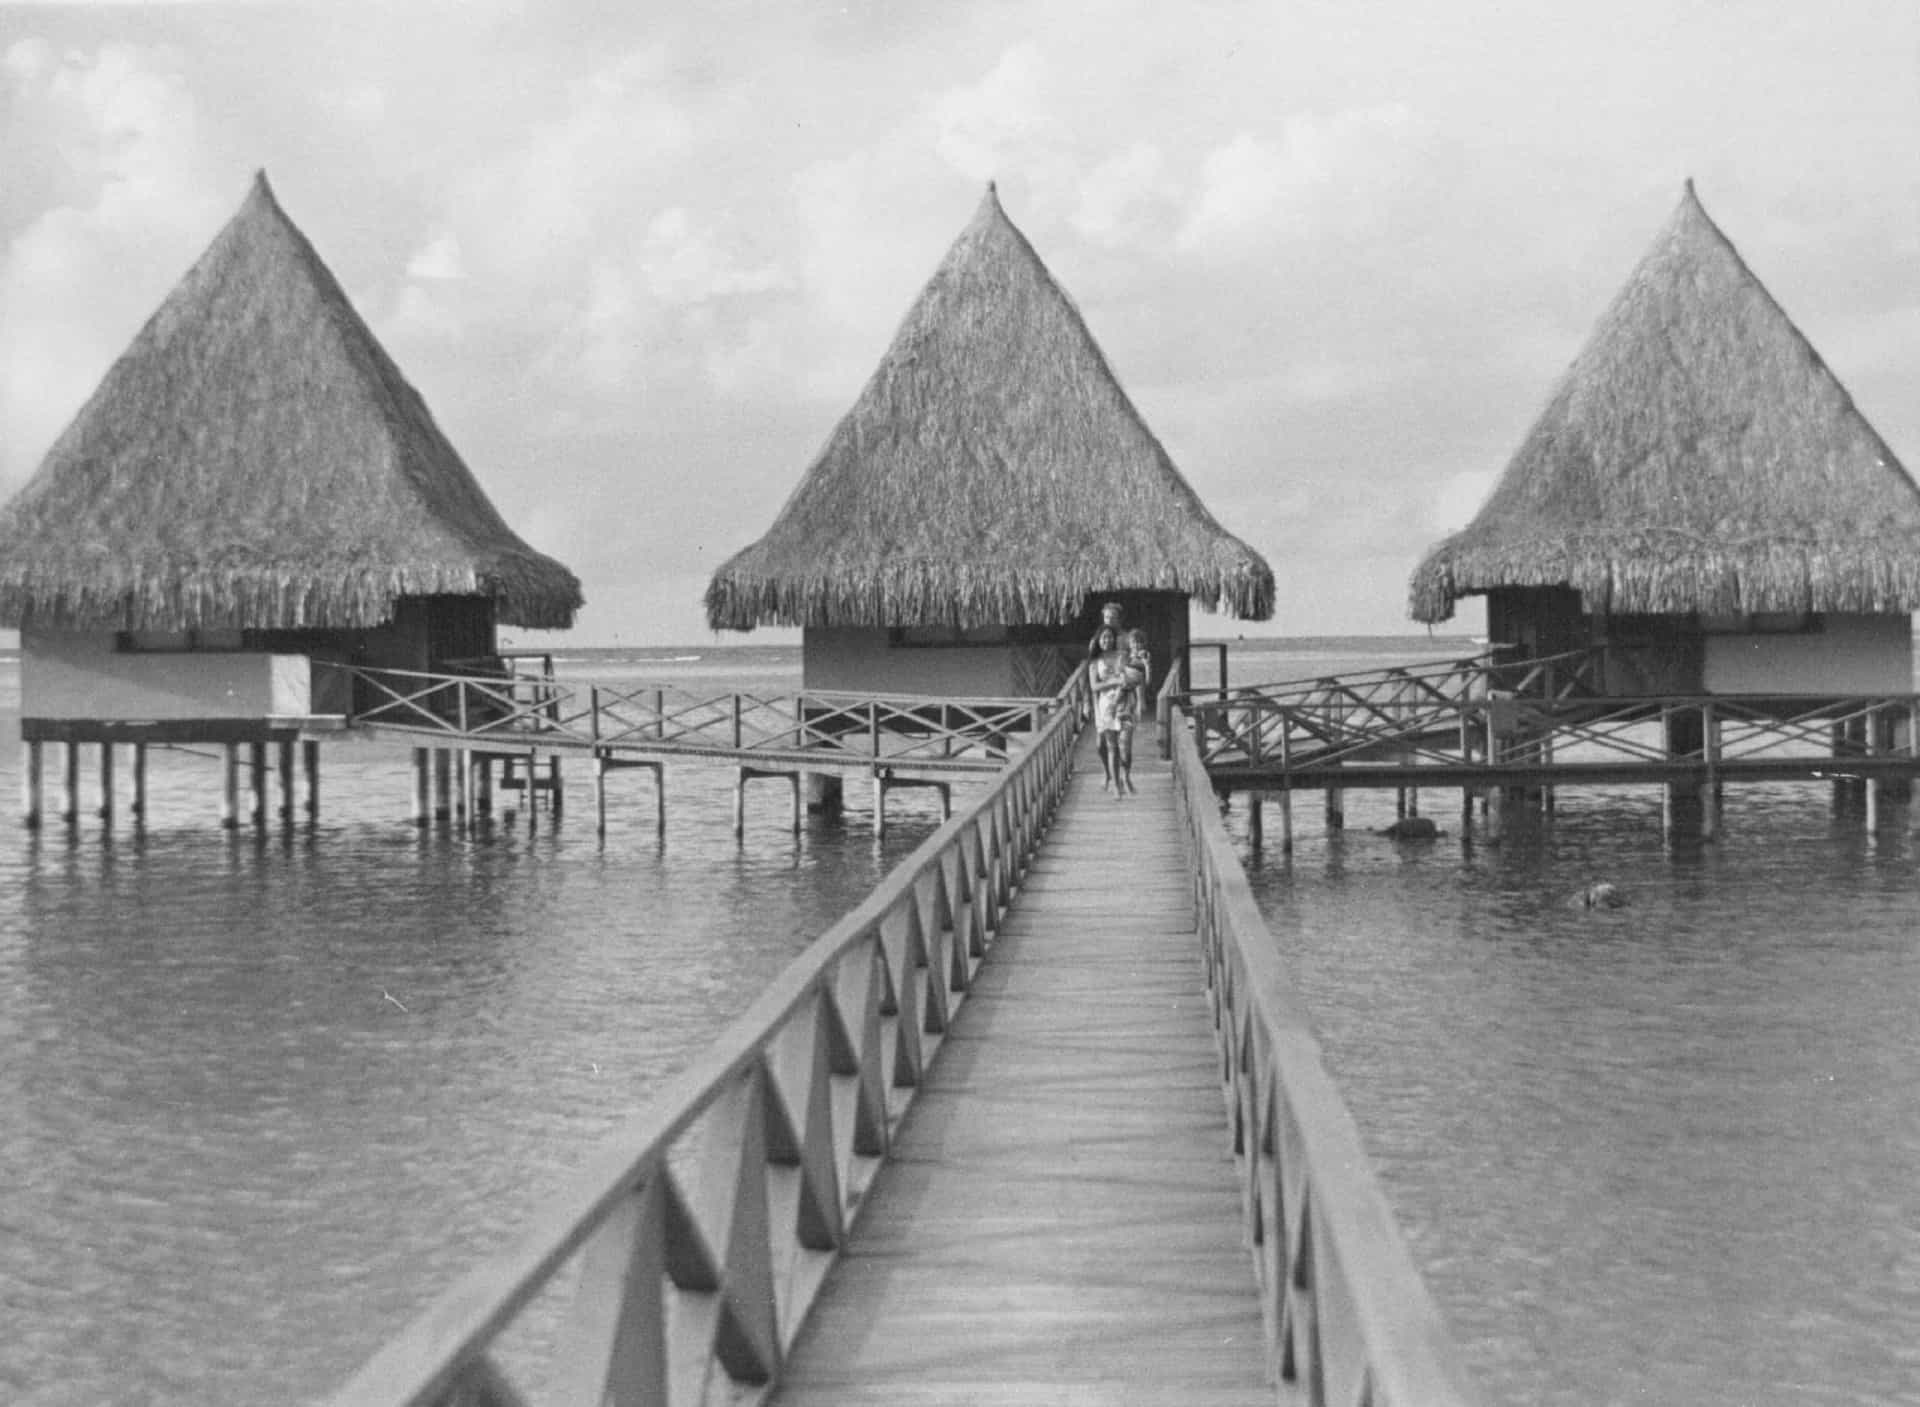 <p>By 1973, tourism had picked up in Indonesia, with around 100,000 tourists visiting Bali that year alone. Gorgeous beaches, culture, and cheap prices attracted many Americans. </p>